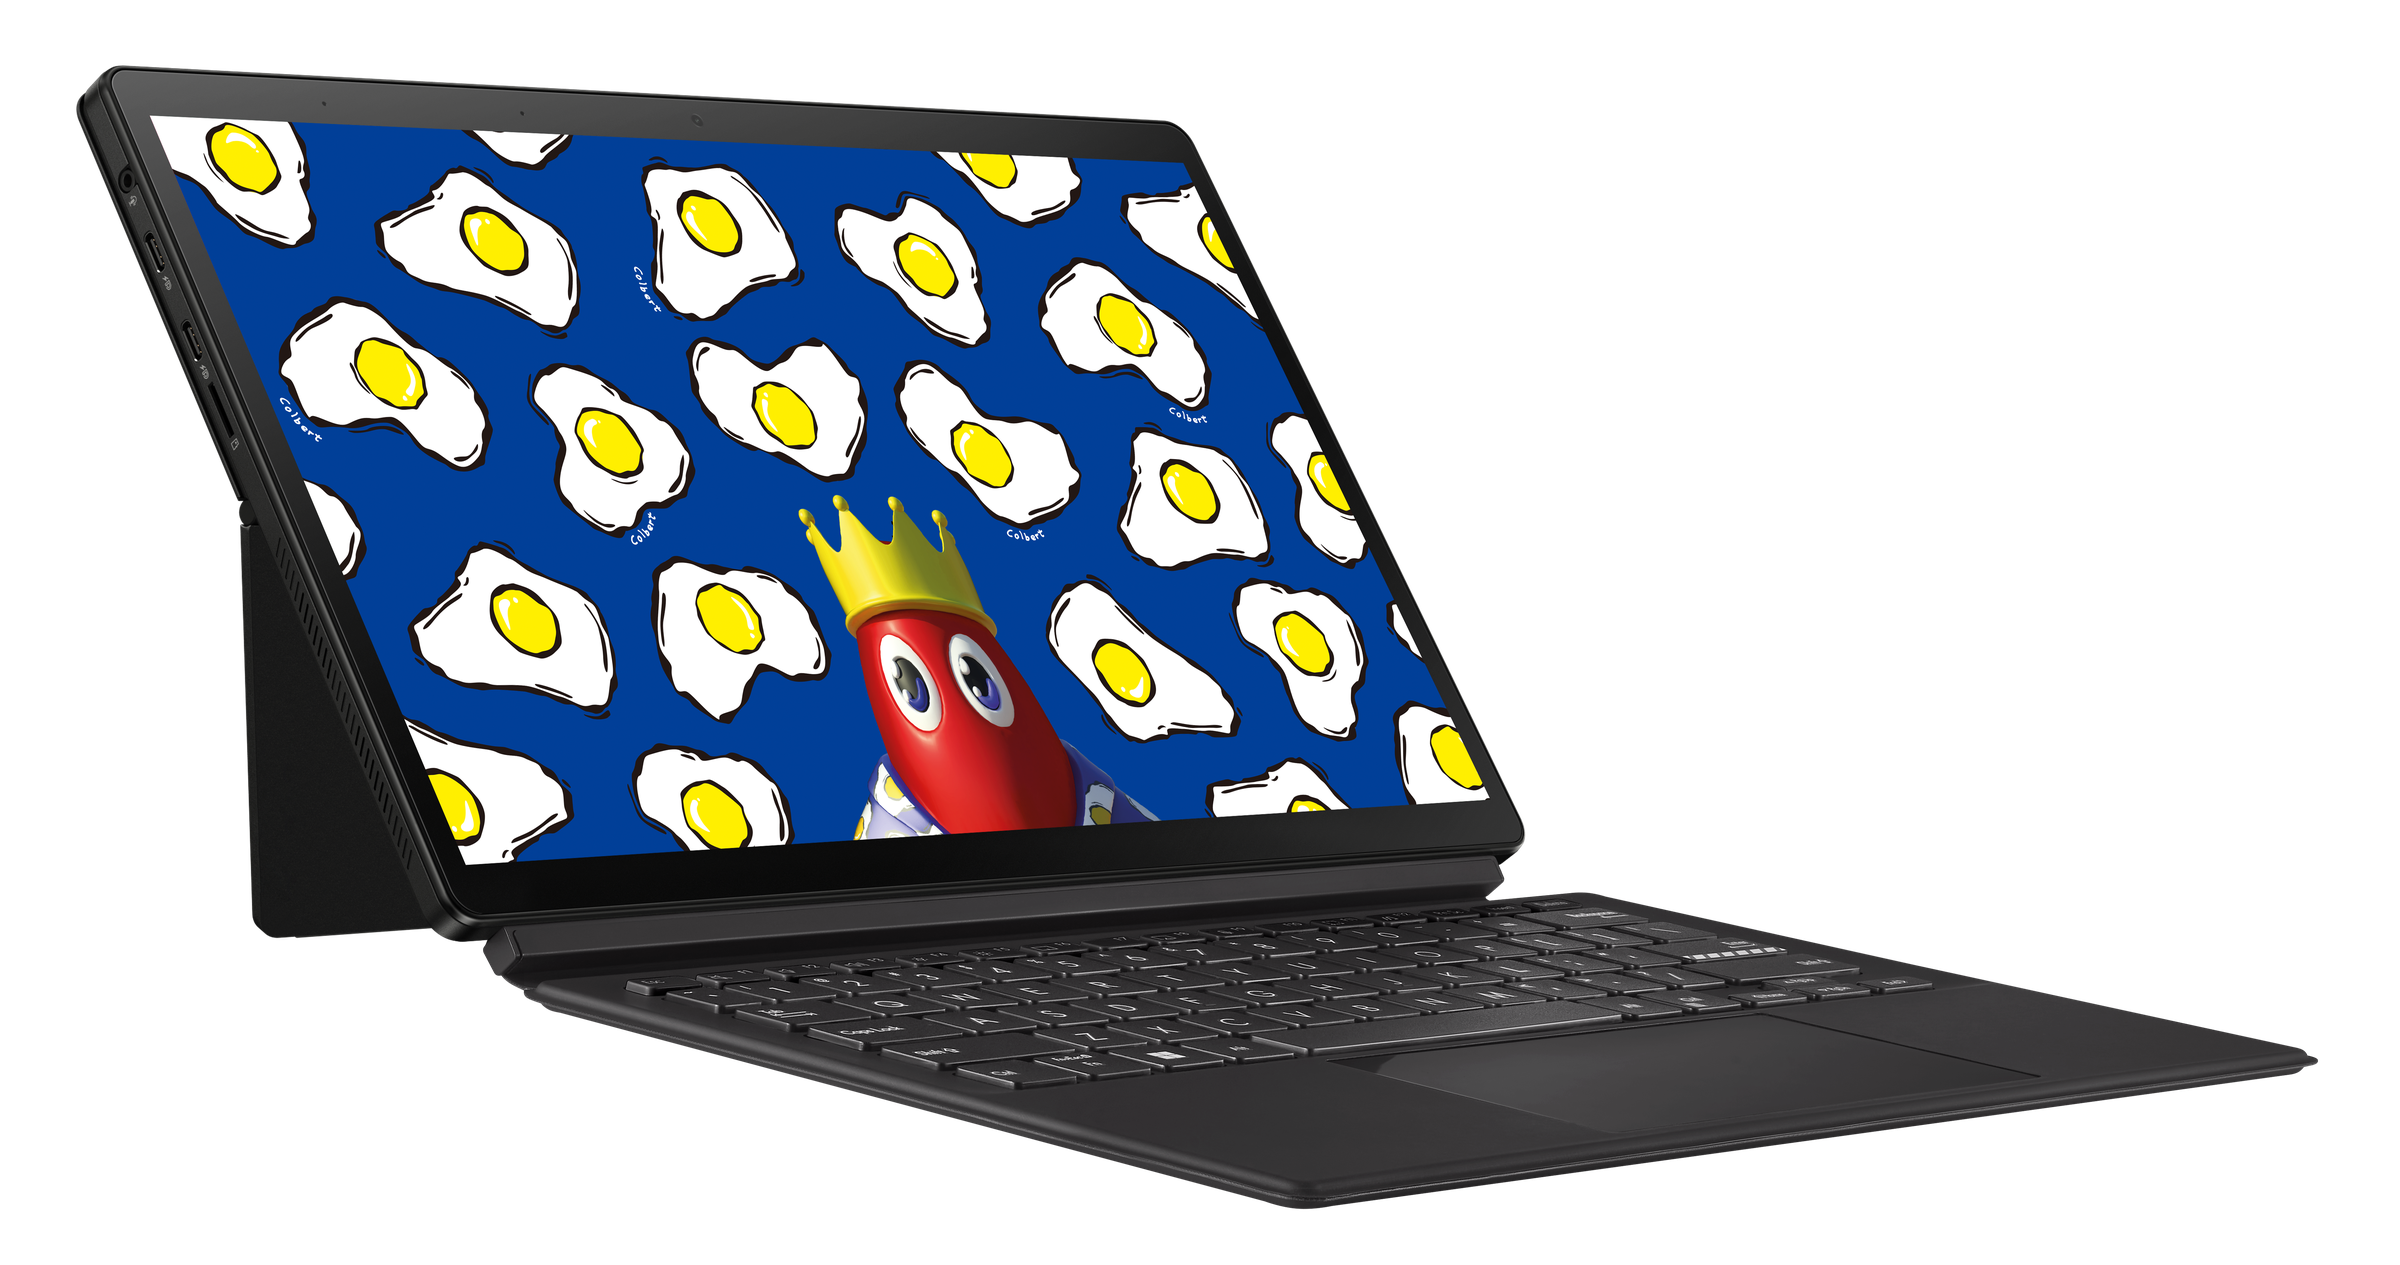 The Asus Vivobook 13 Slate OLED open on a white background with the keyboard attached. The screen displays a lobster wearing a crown in front of a blue wallpaper dotted with eggs.